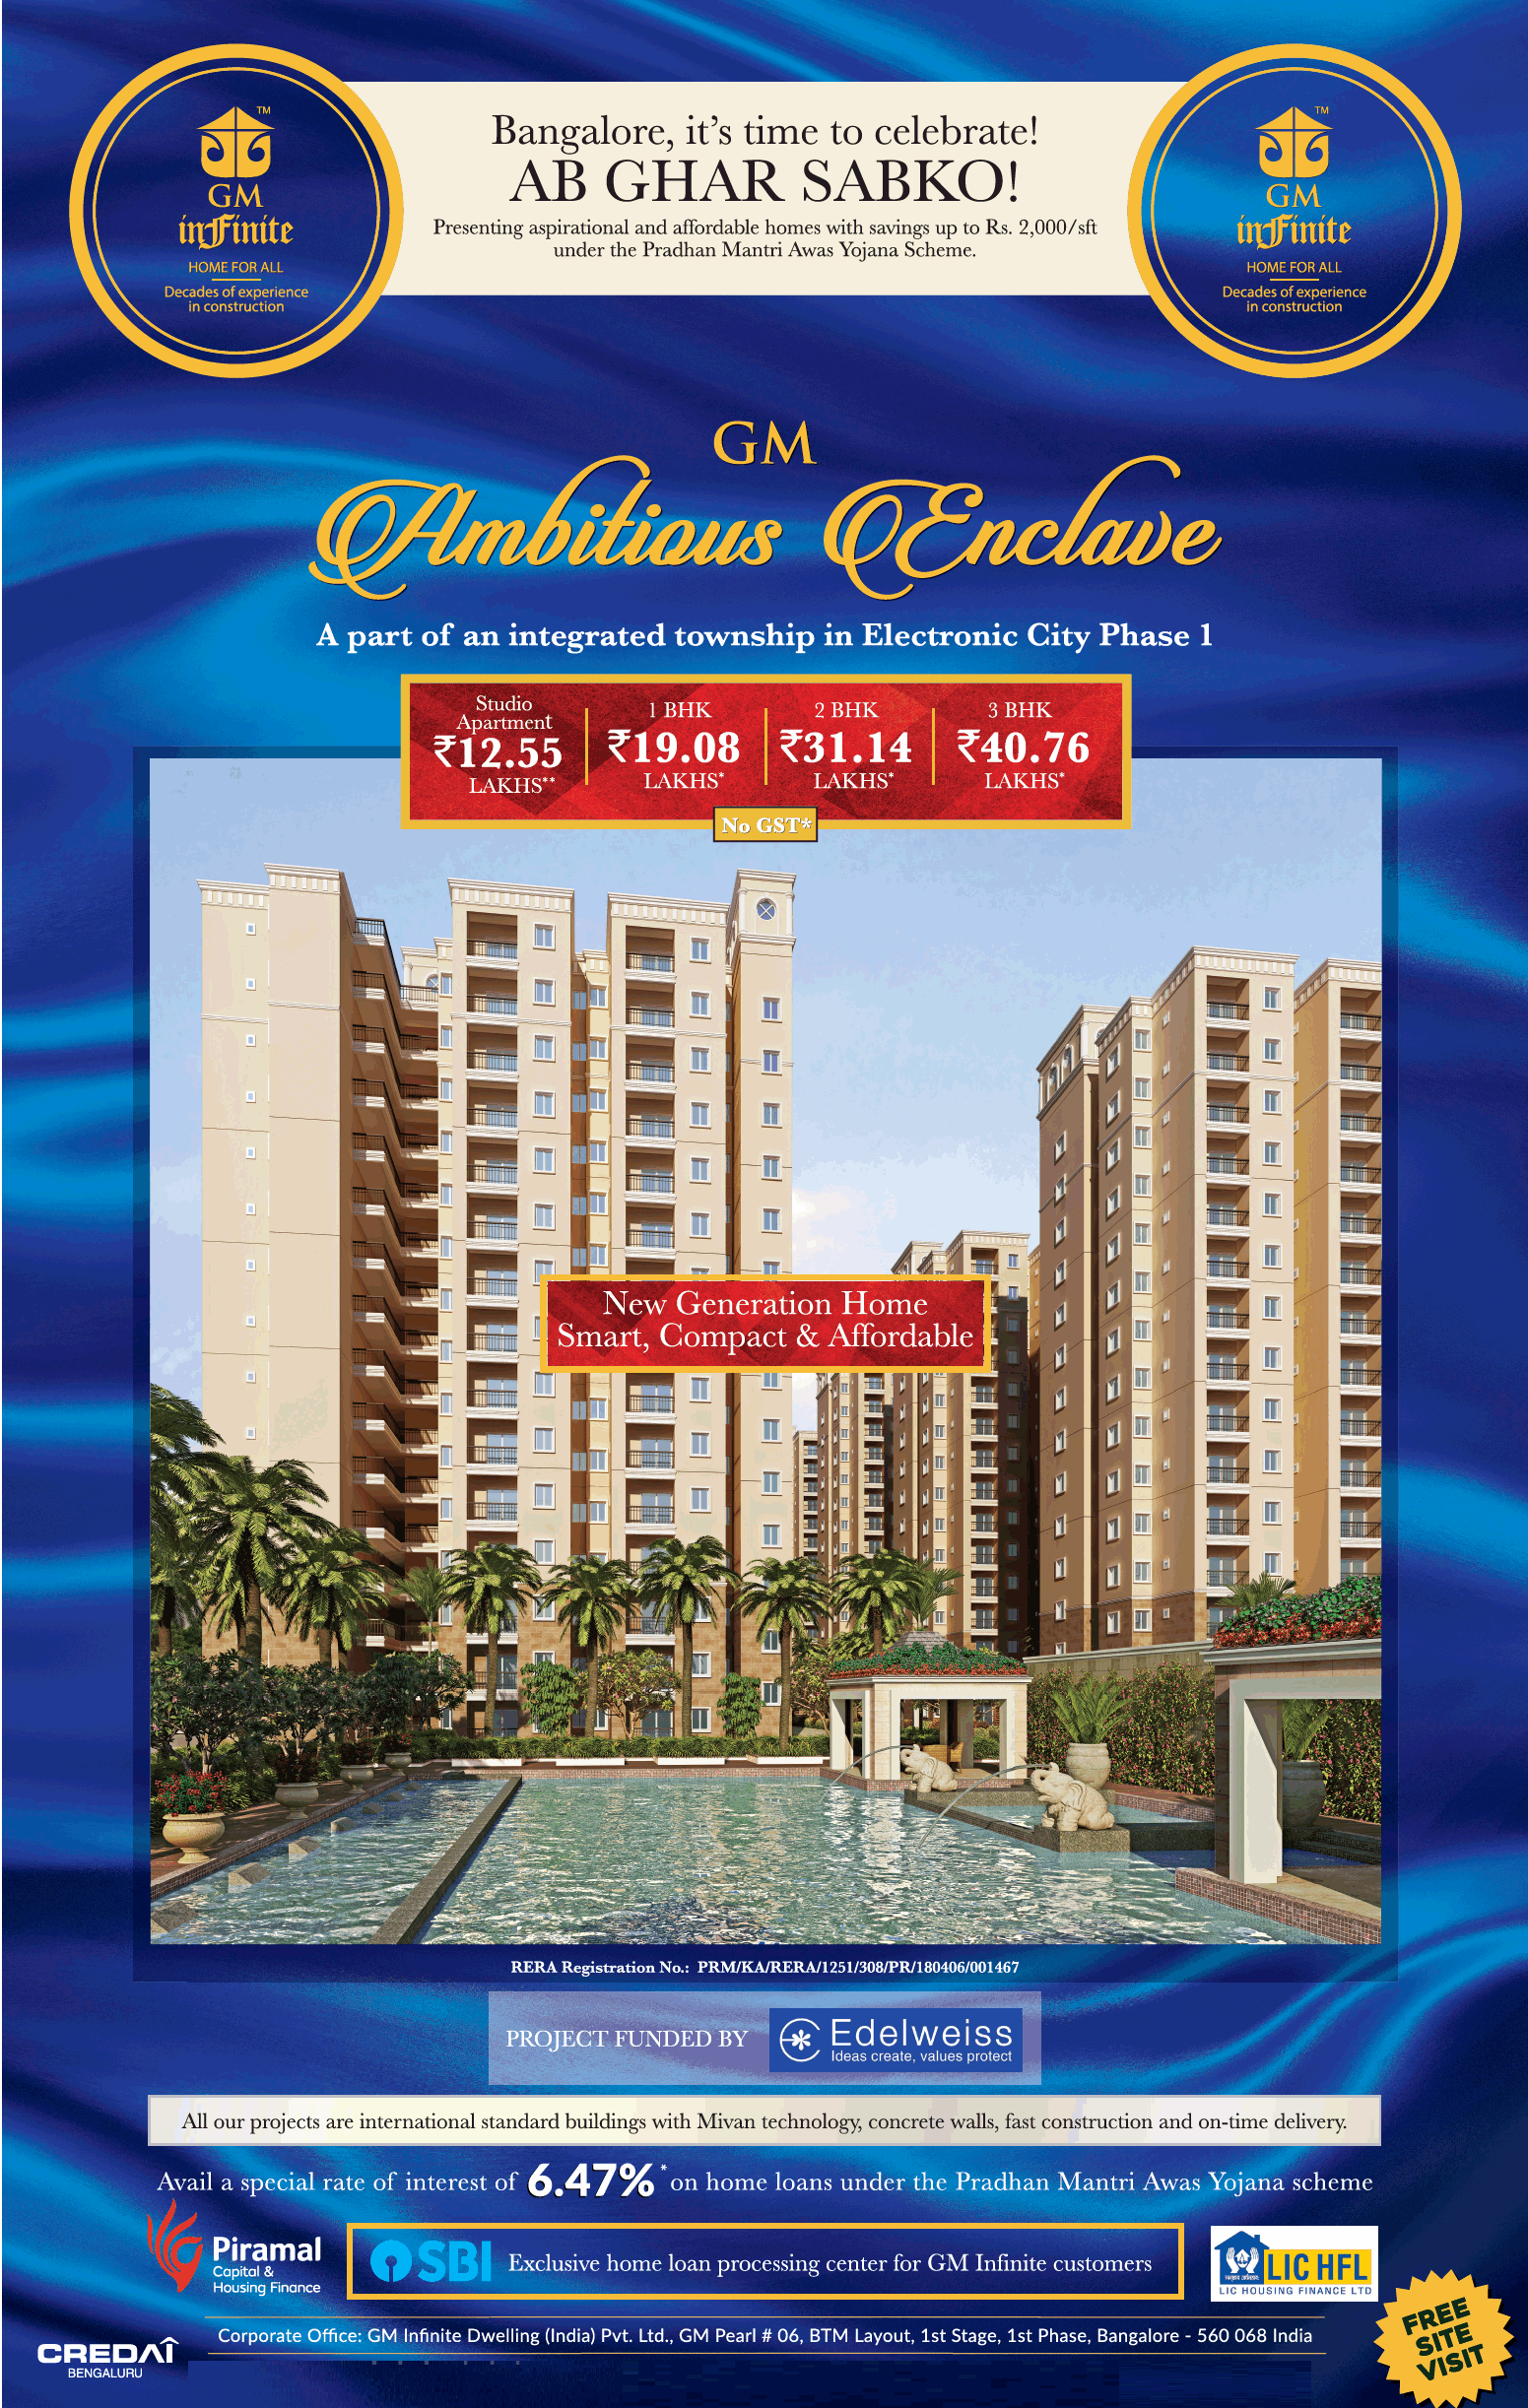 Book 1, 2, 3 bhk & studio apartment at GM Ambitious Enclave in Bangalore Update